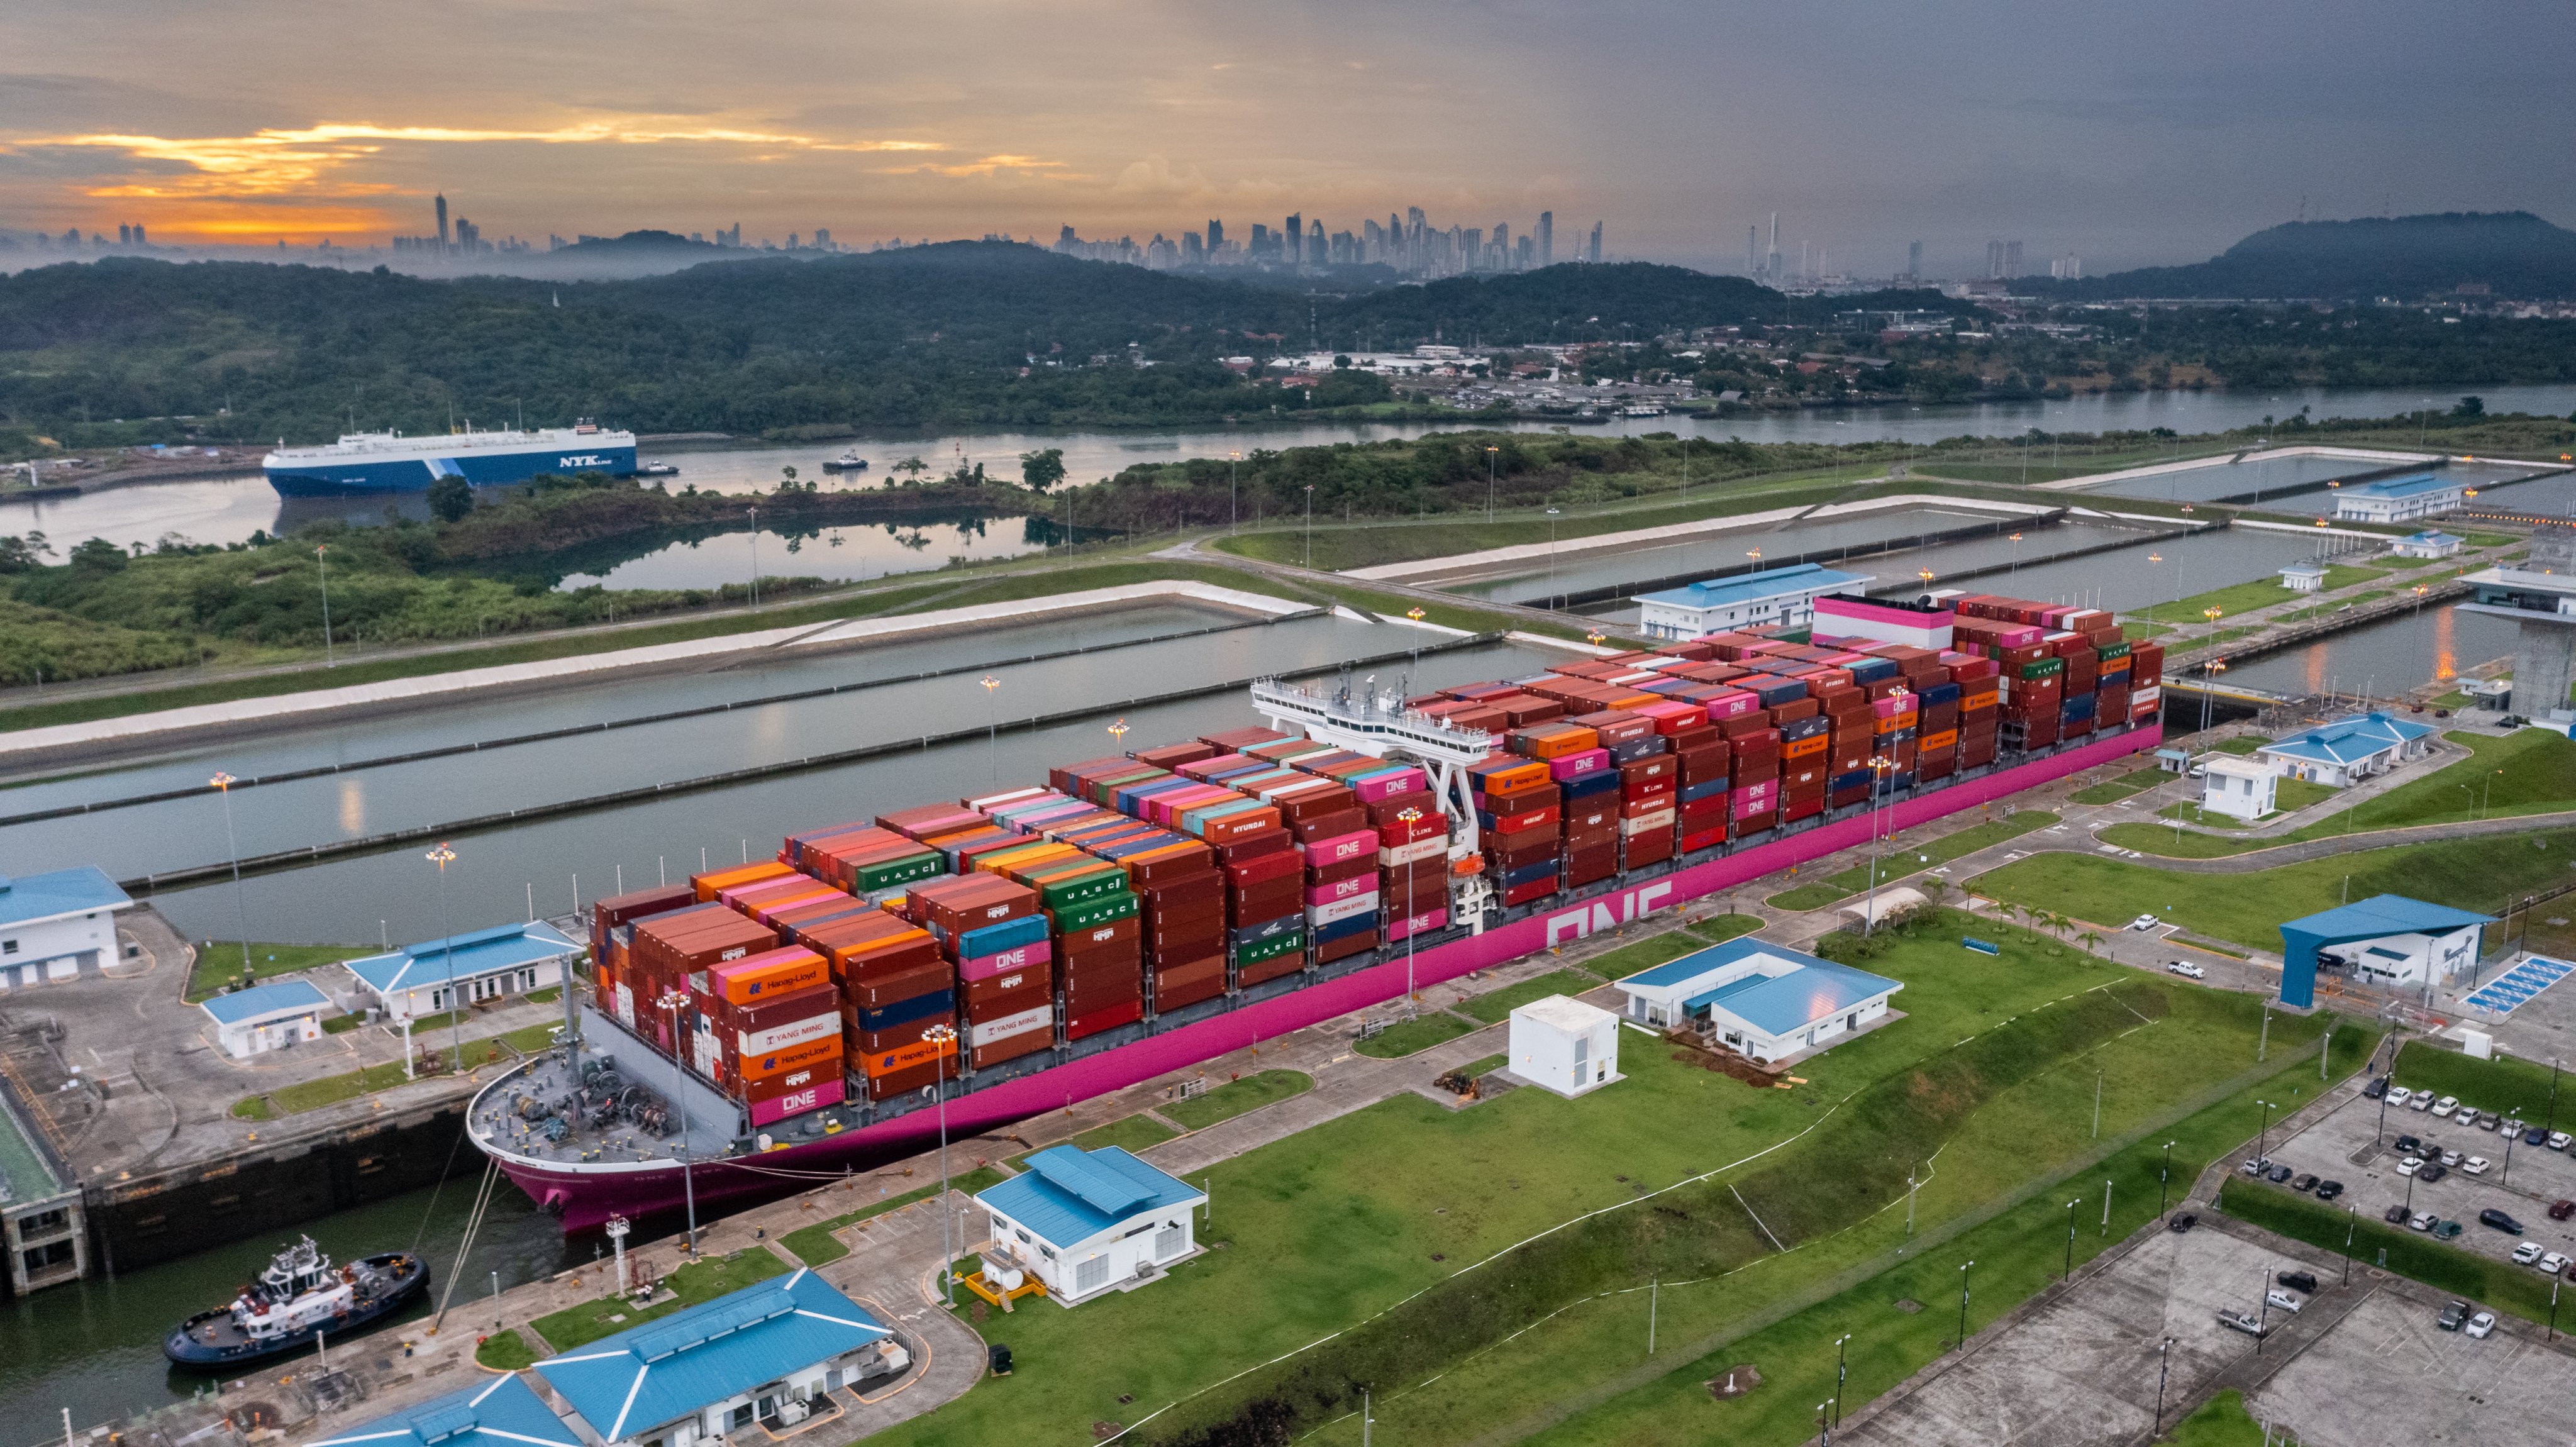 Panama Canal Extends Maximum Length Overall and Increases Draft for Neopanamax Locks